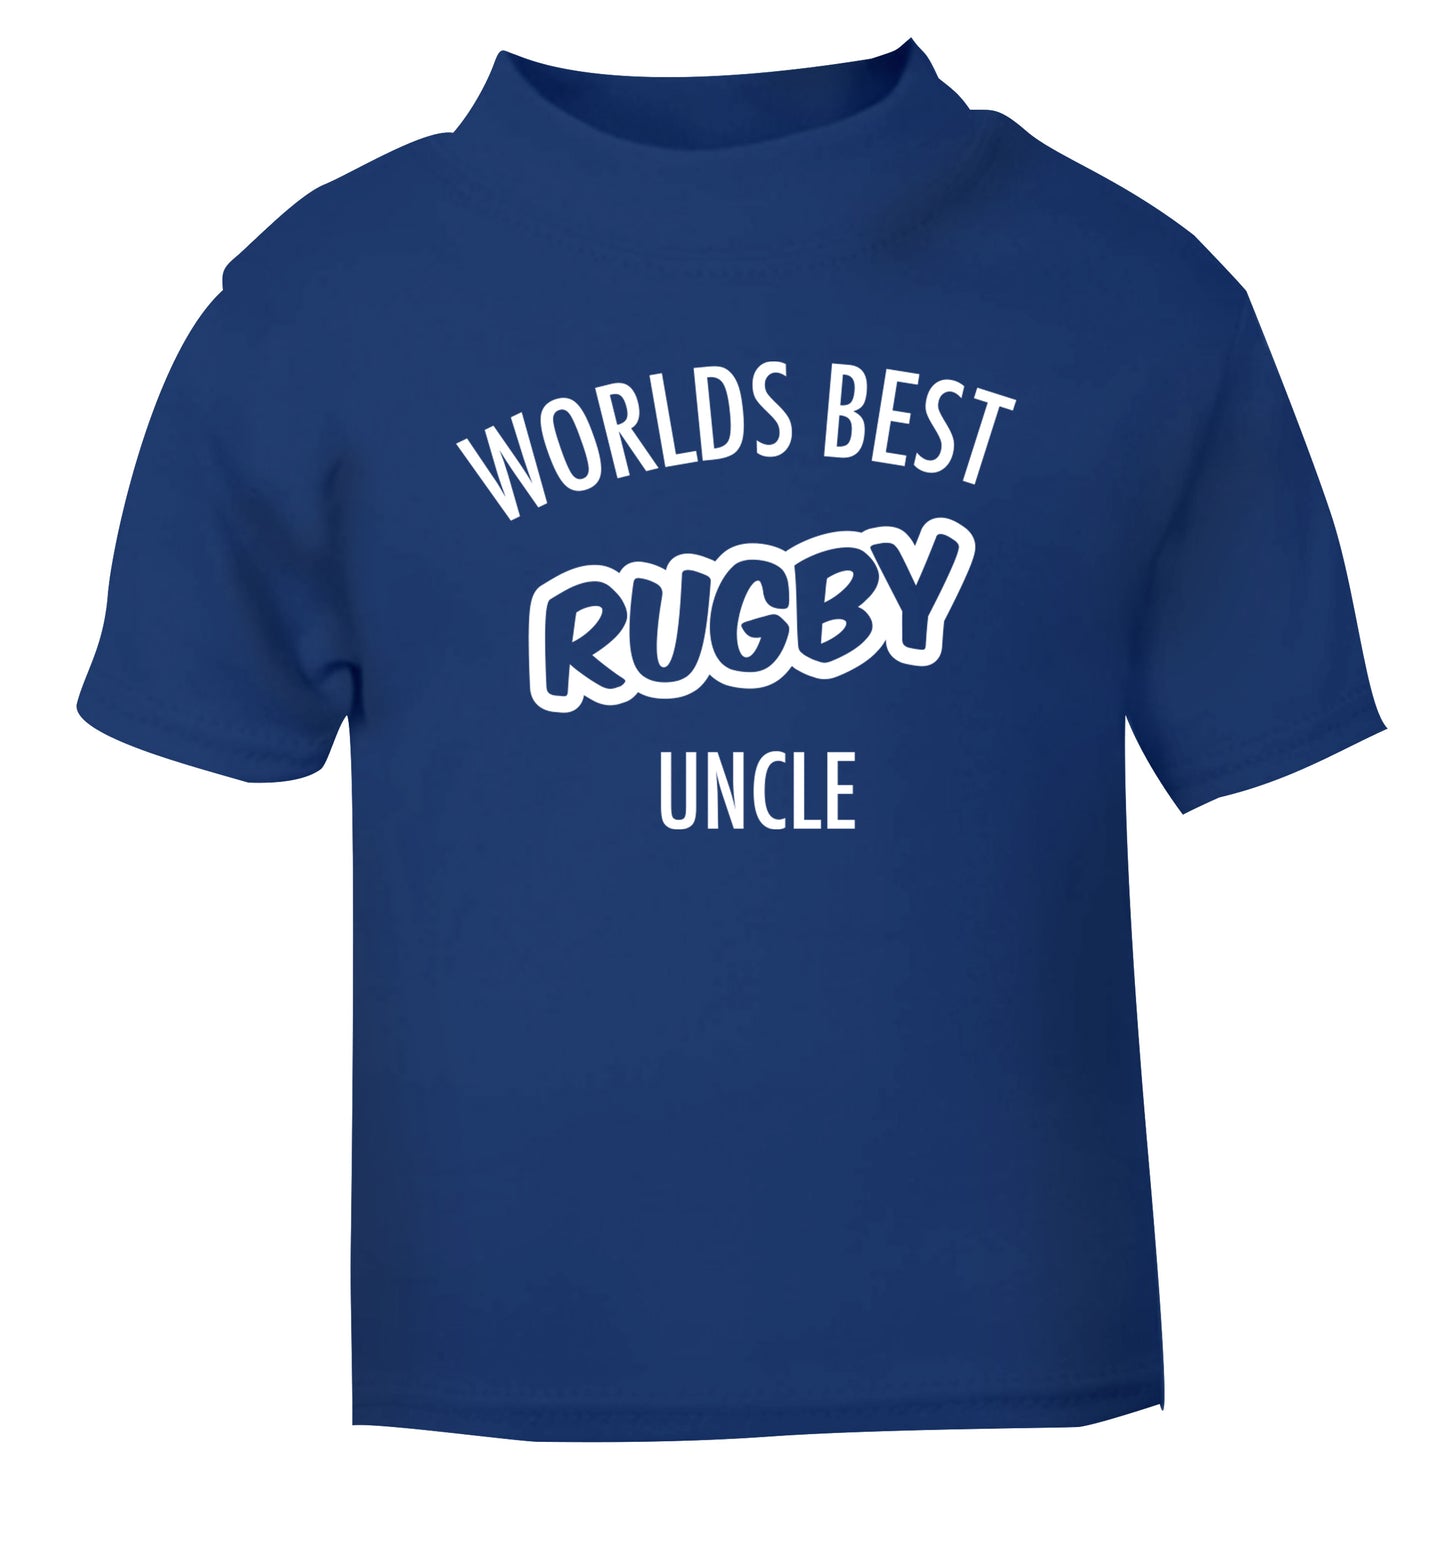 Worlds best rugby uncle blue Baby Toddler Tshirt 2 Years